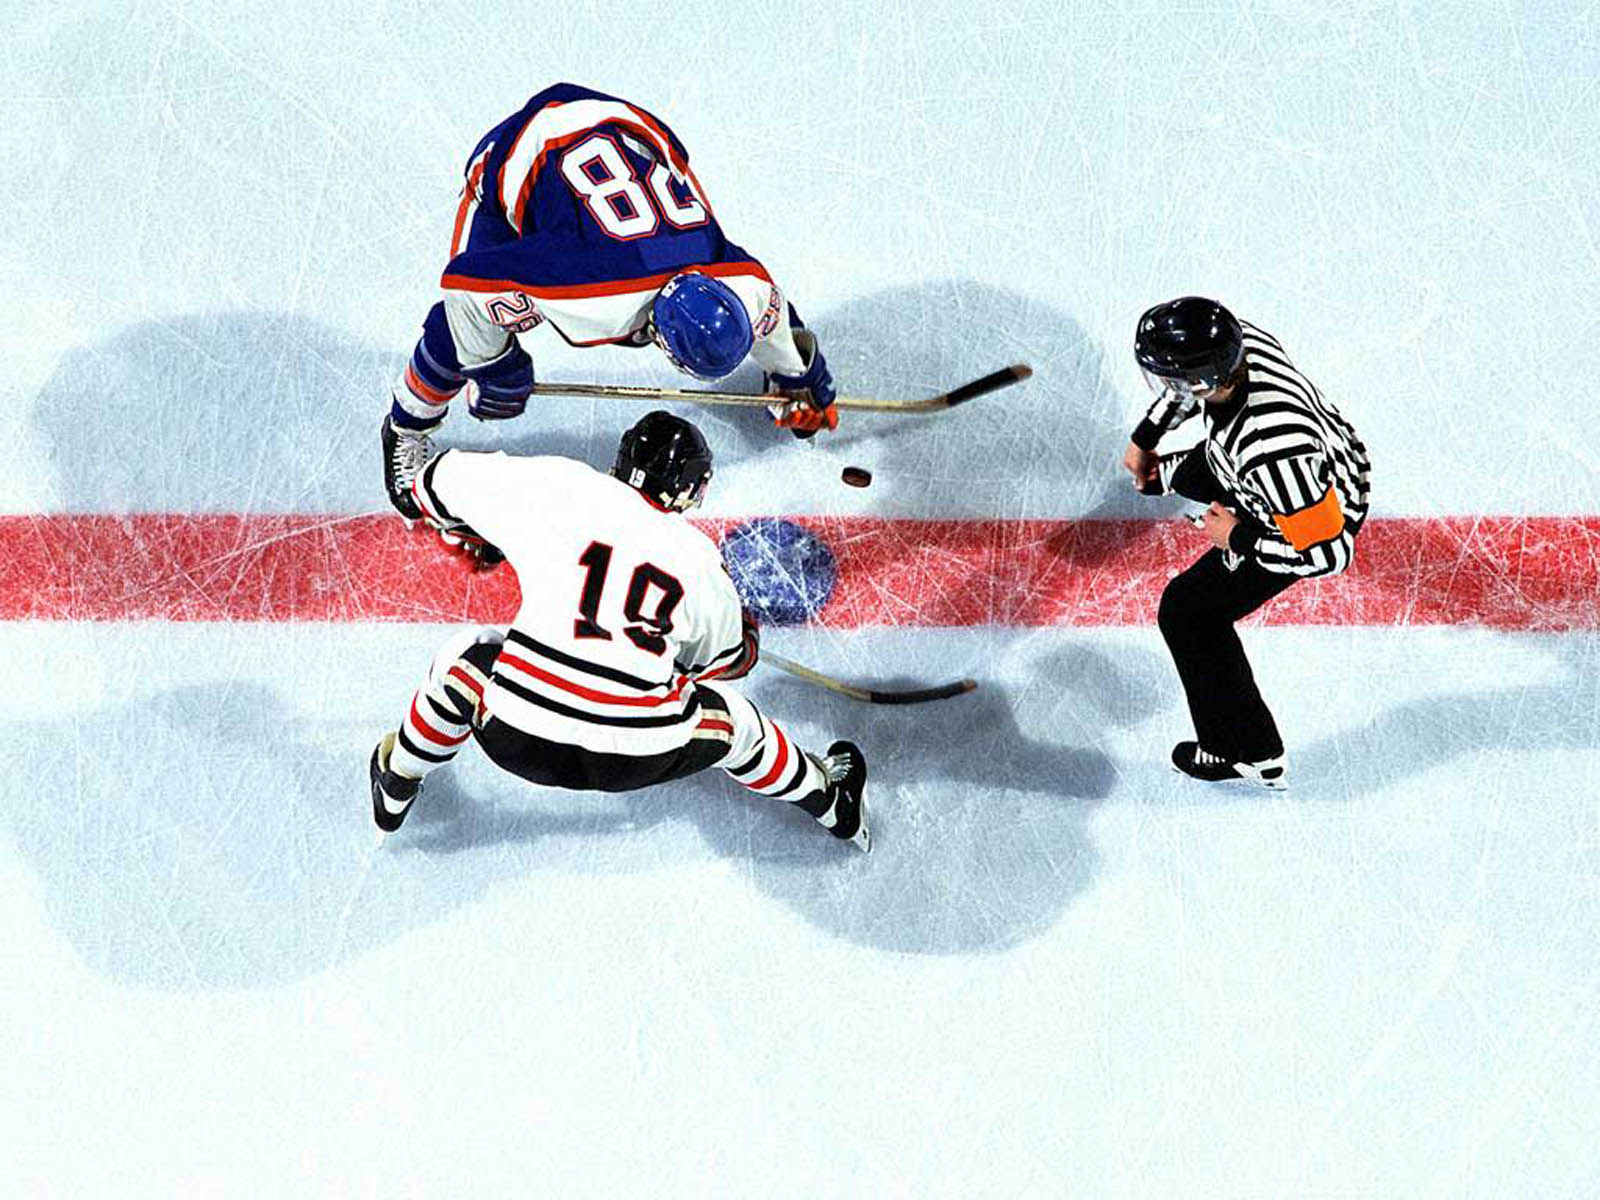 Ice Hockey Wallpaper Image Photos Pictures And Background For